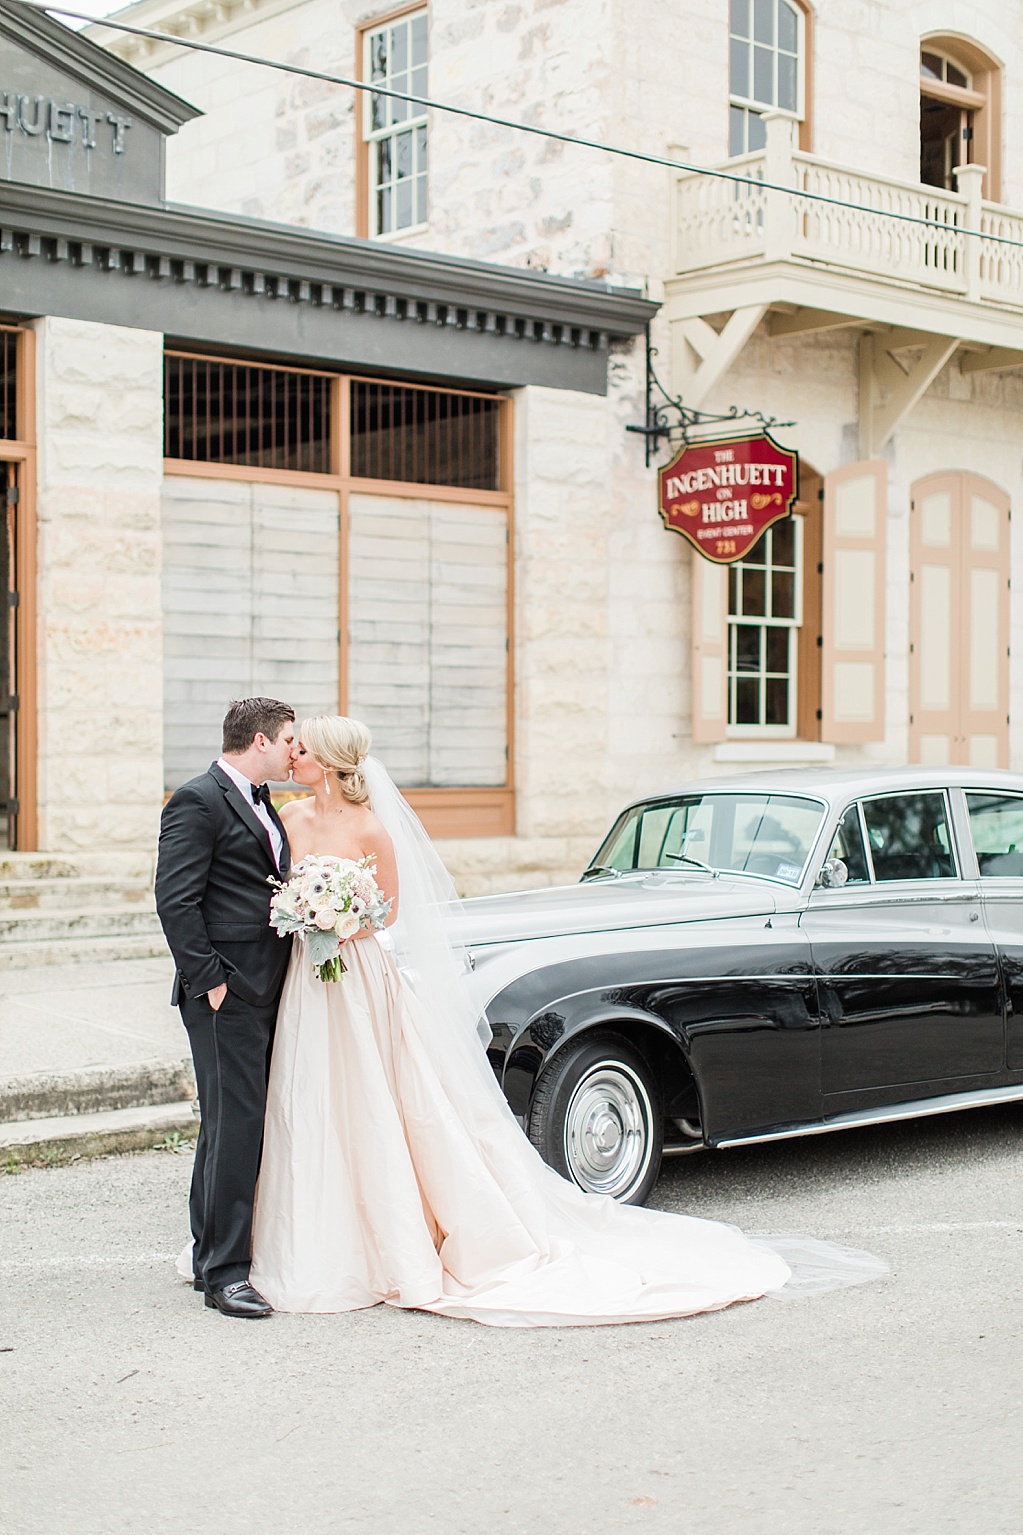 An Art Deco Black Tie Wedding at The Ingenhuett On High in Comfort Texas Featuring a Bentley Vintage Car and Blush Wedding Dress 0036